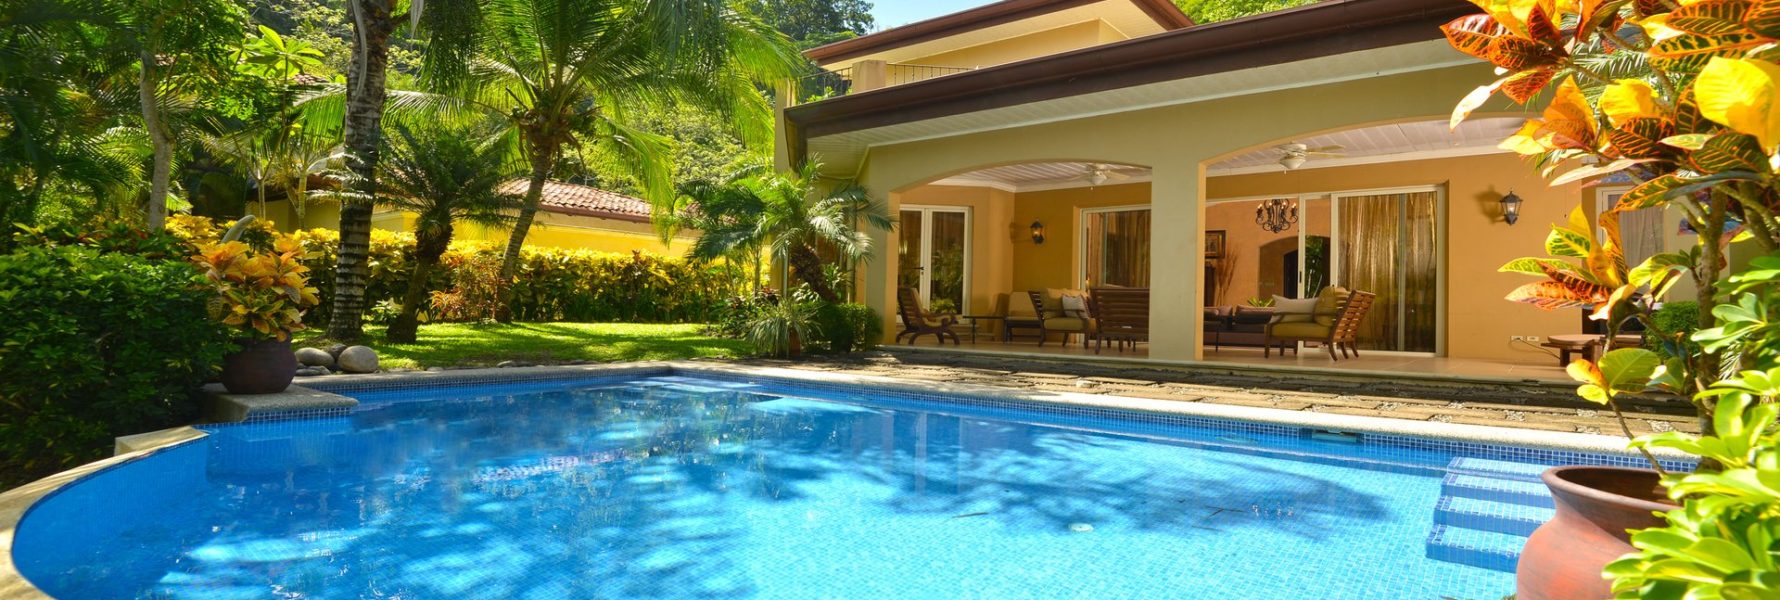 Outdoor pool surrounded by green tropical gardens. JA-04 is the perfect tropical destination for your next vacation.